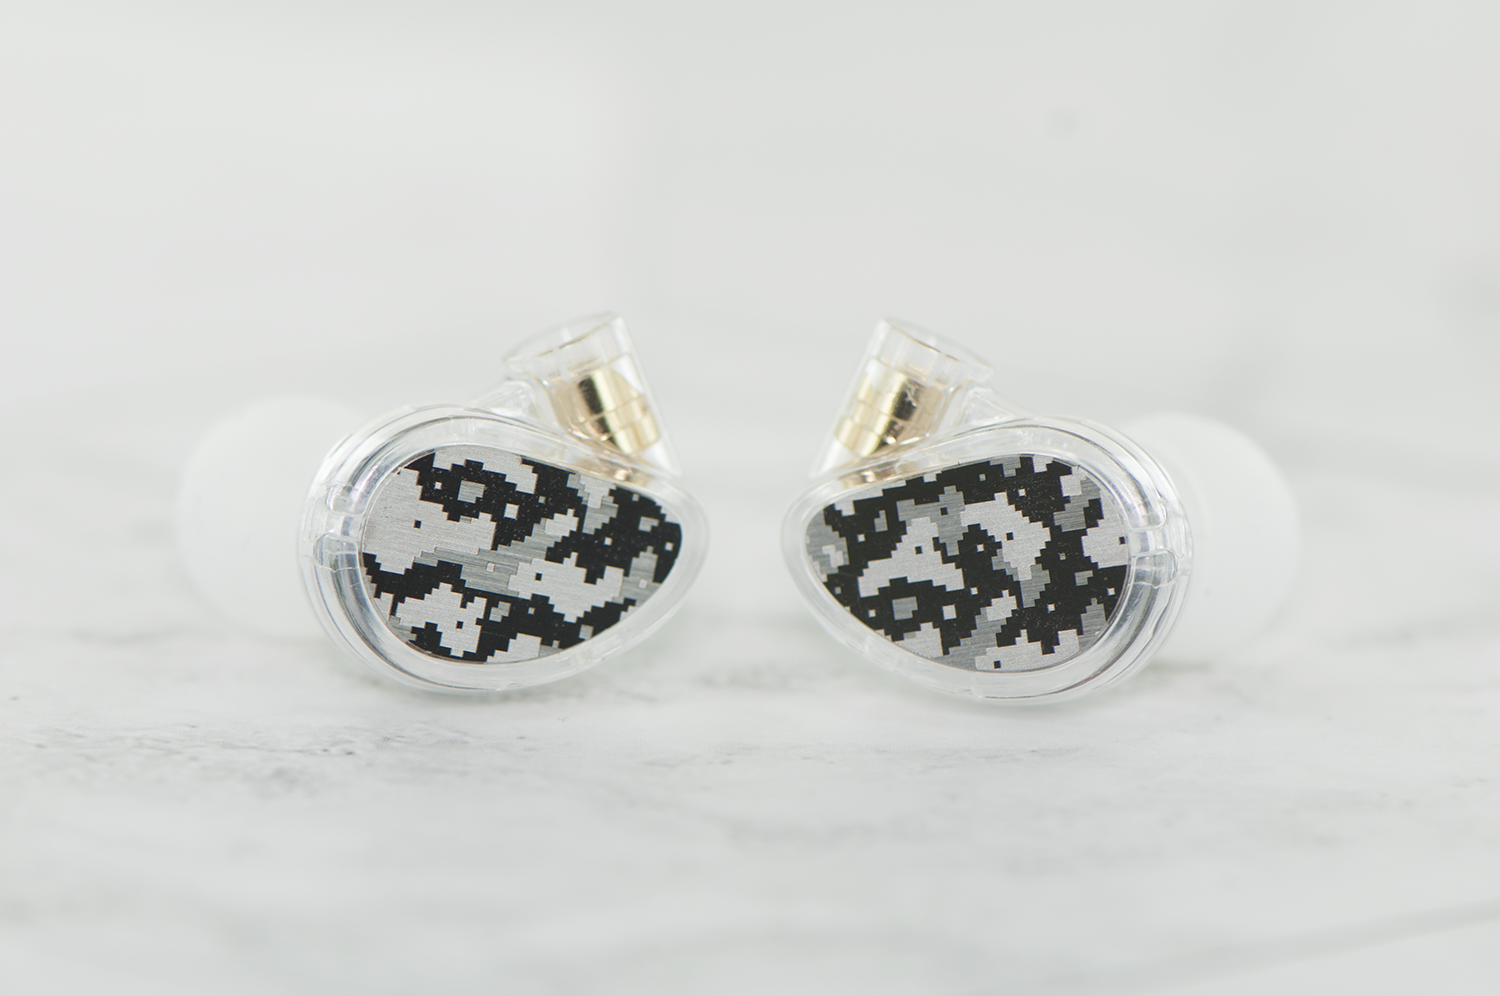 A pair of transparent in-ear monitors with a unique pixelated design on the faceplates, displayed against a light gray background.